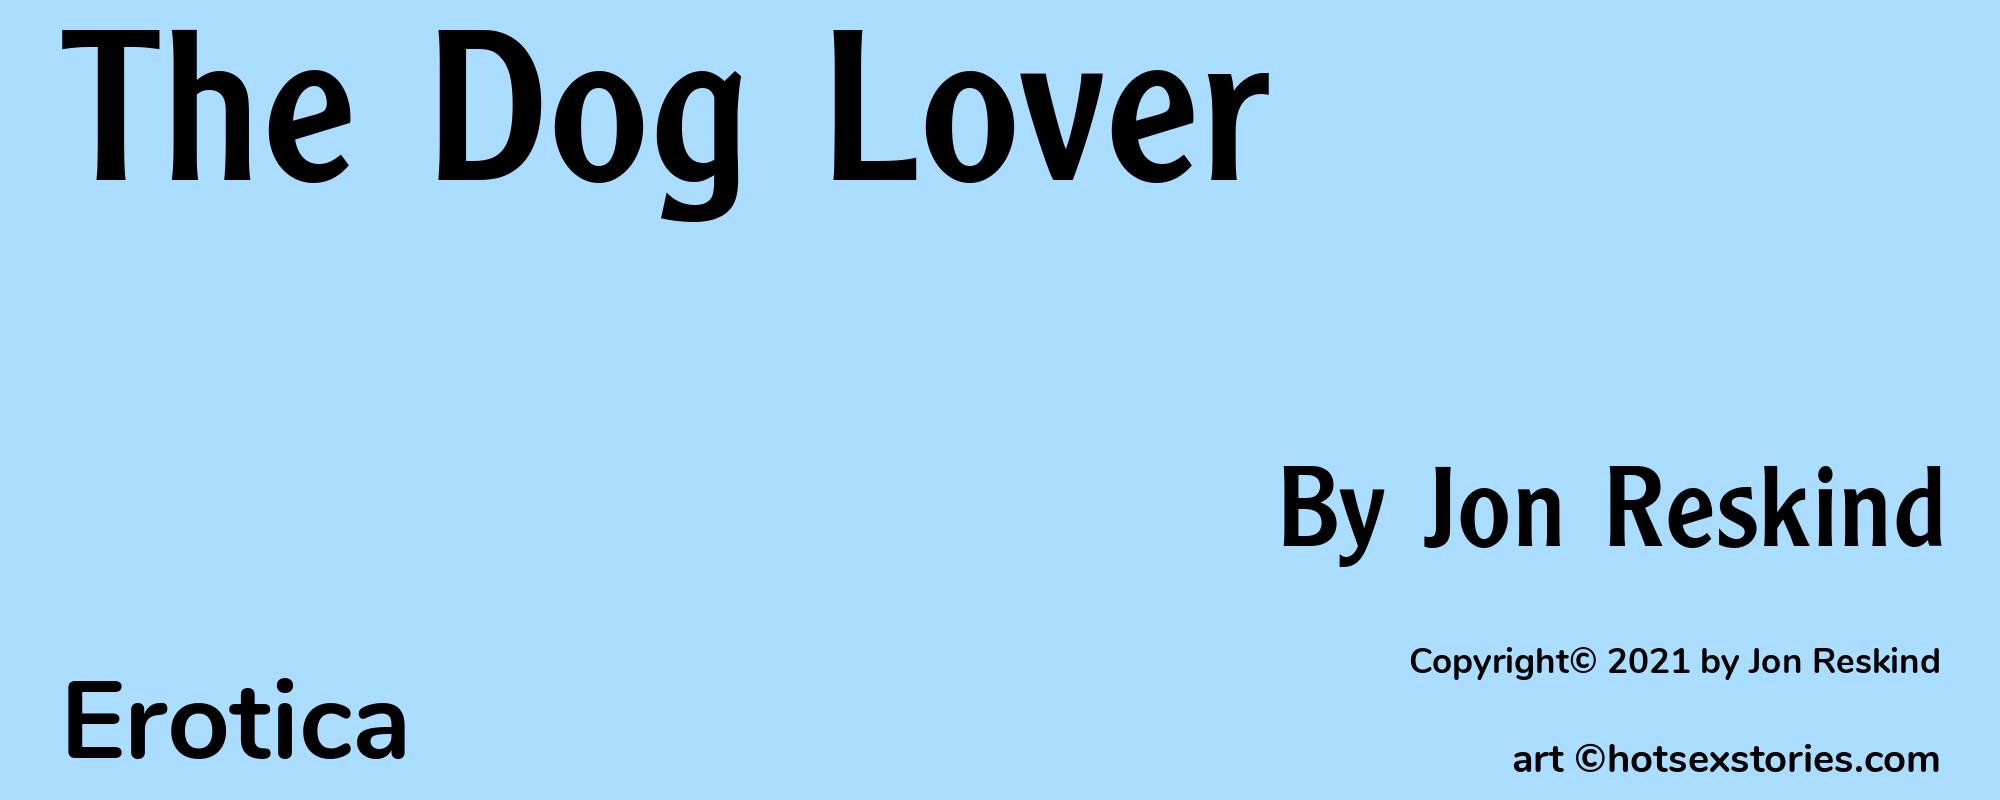 The Dog Lover - Cover